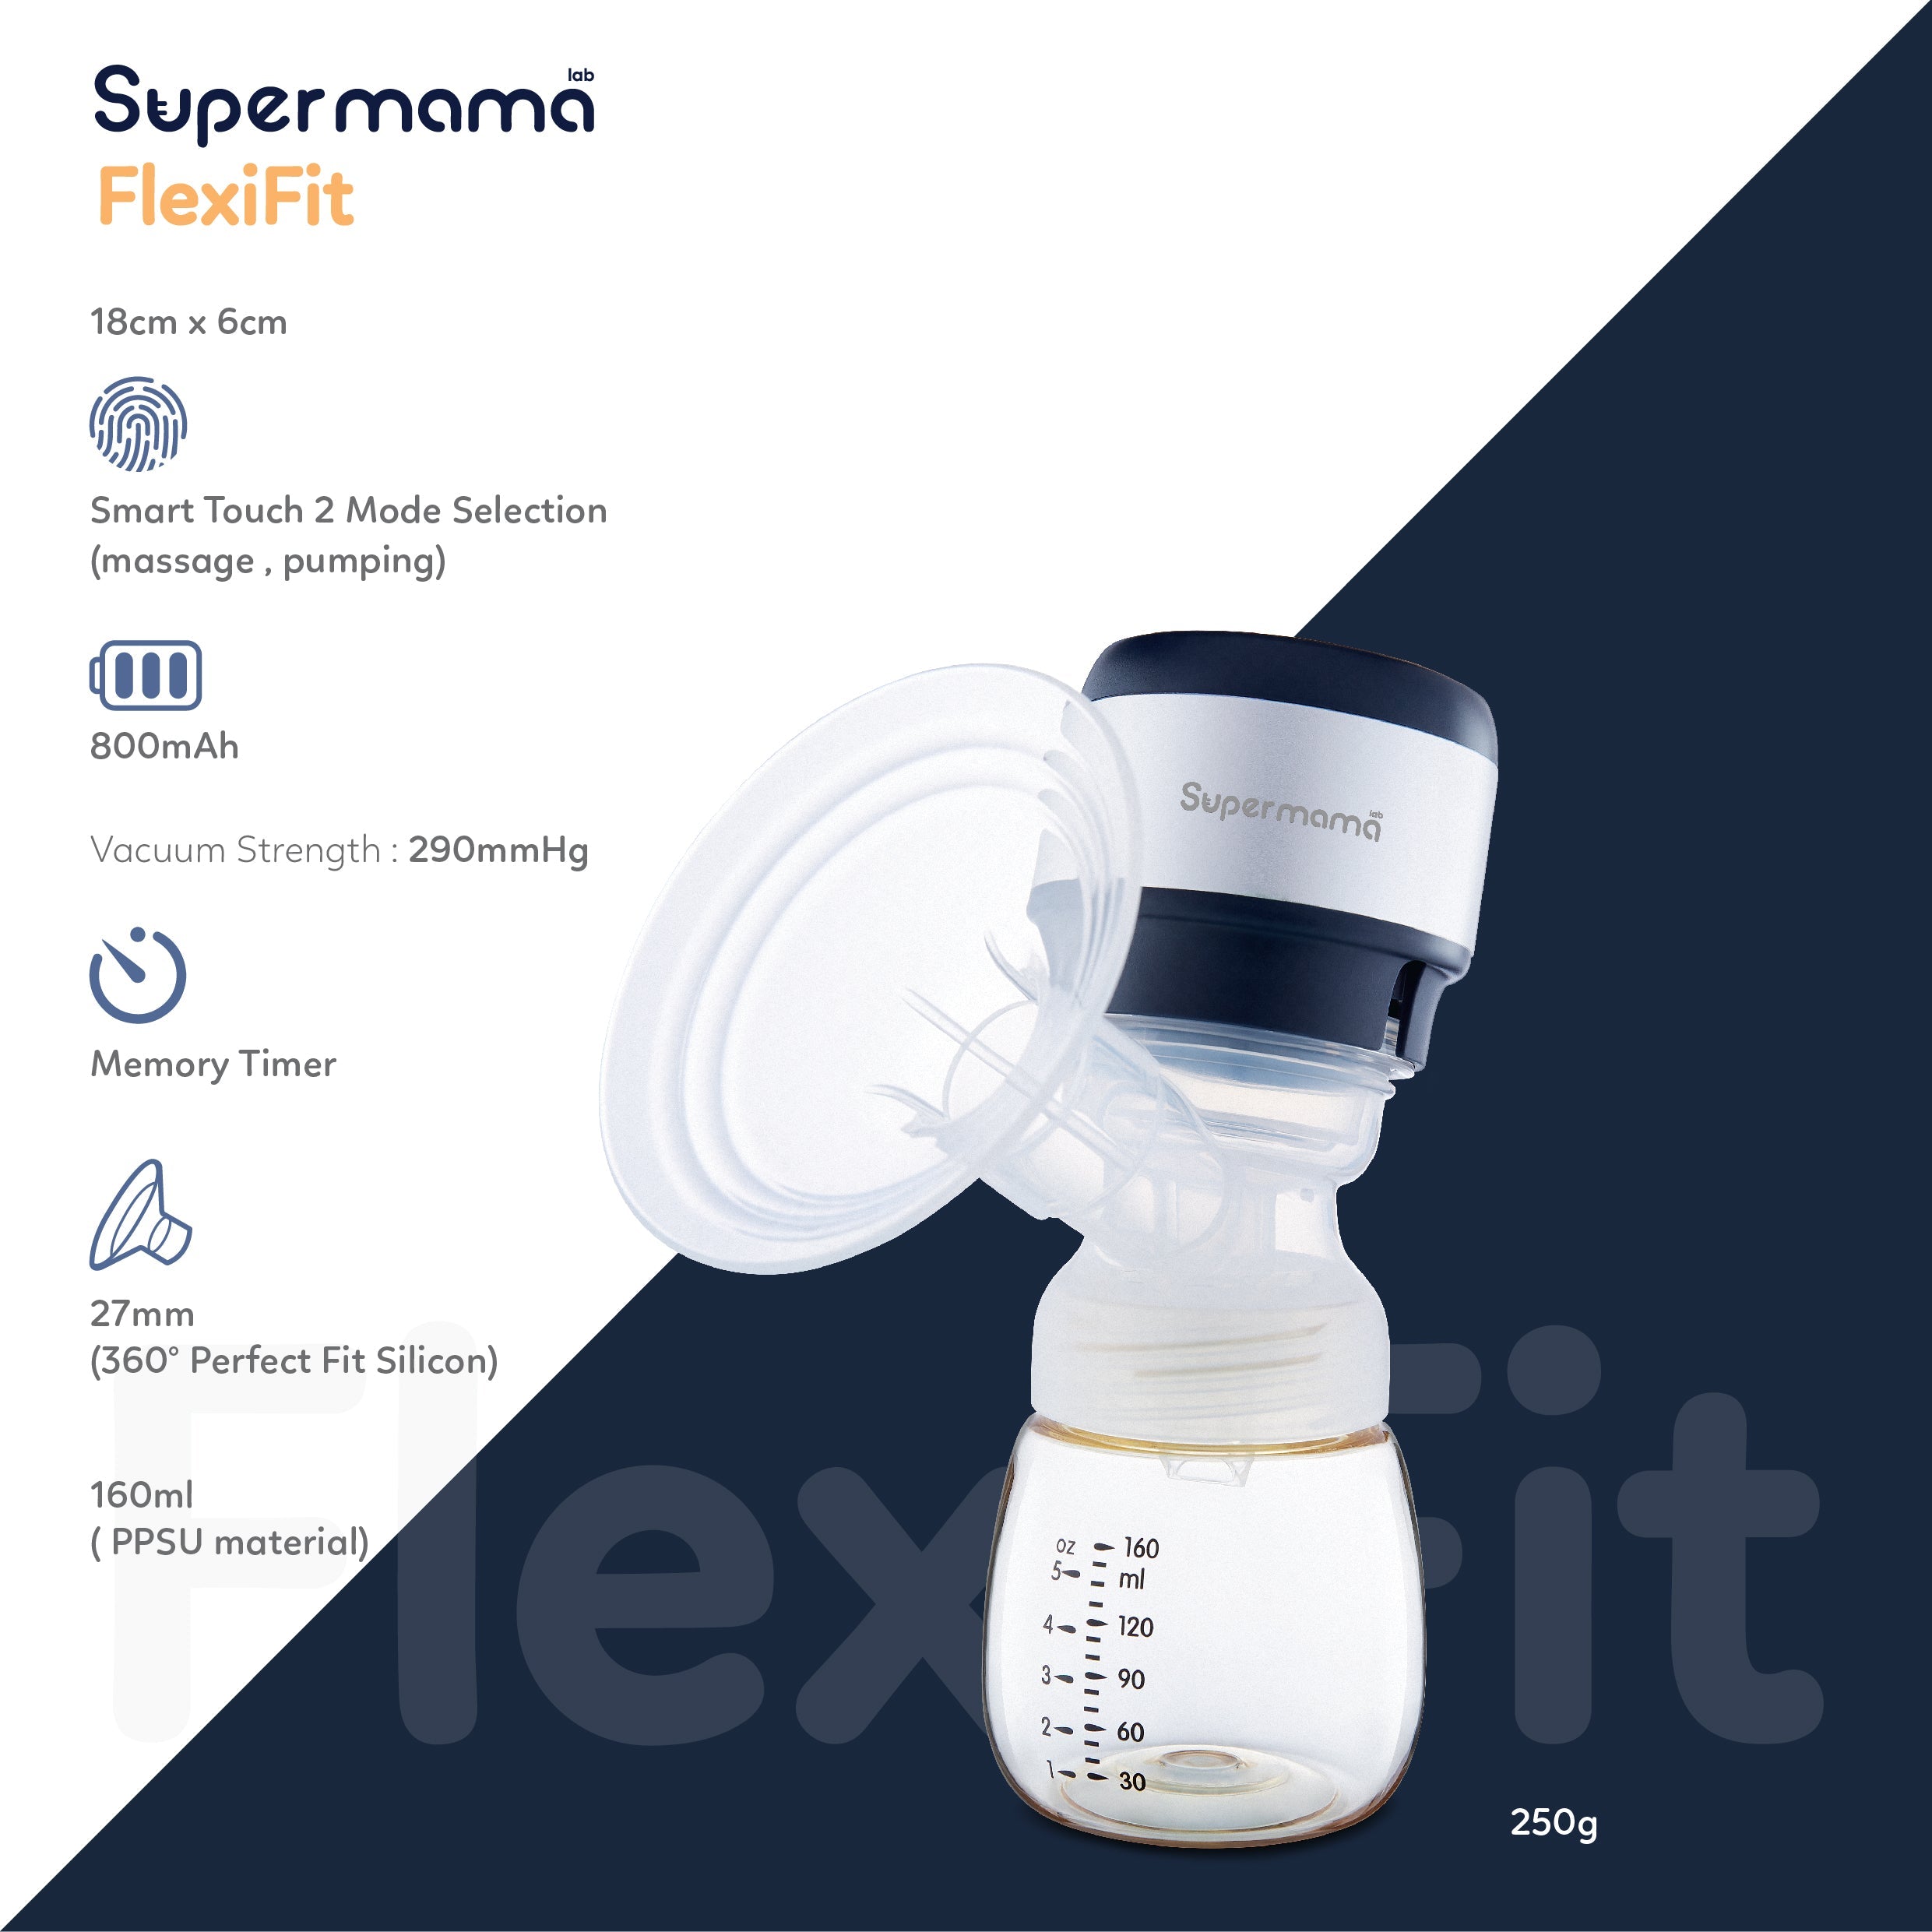 Flexifit Tubeless Breast Pump Specifications